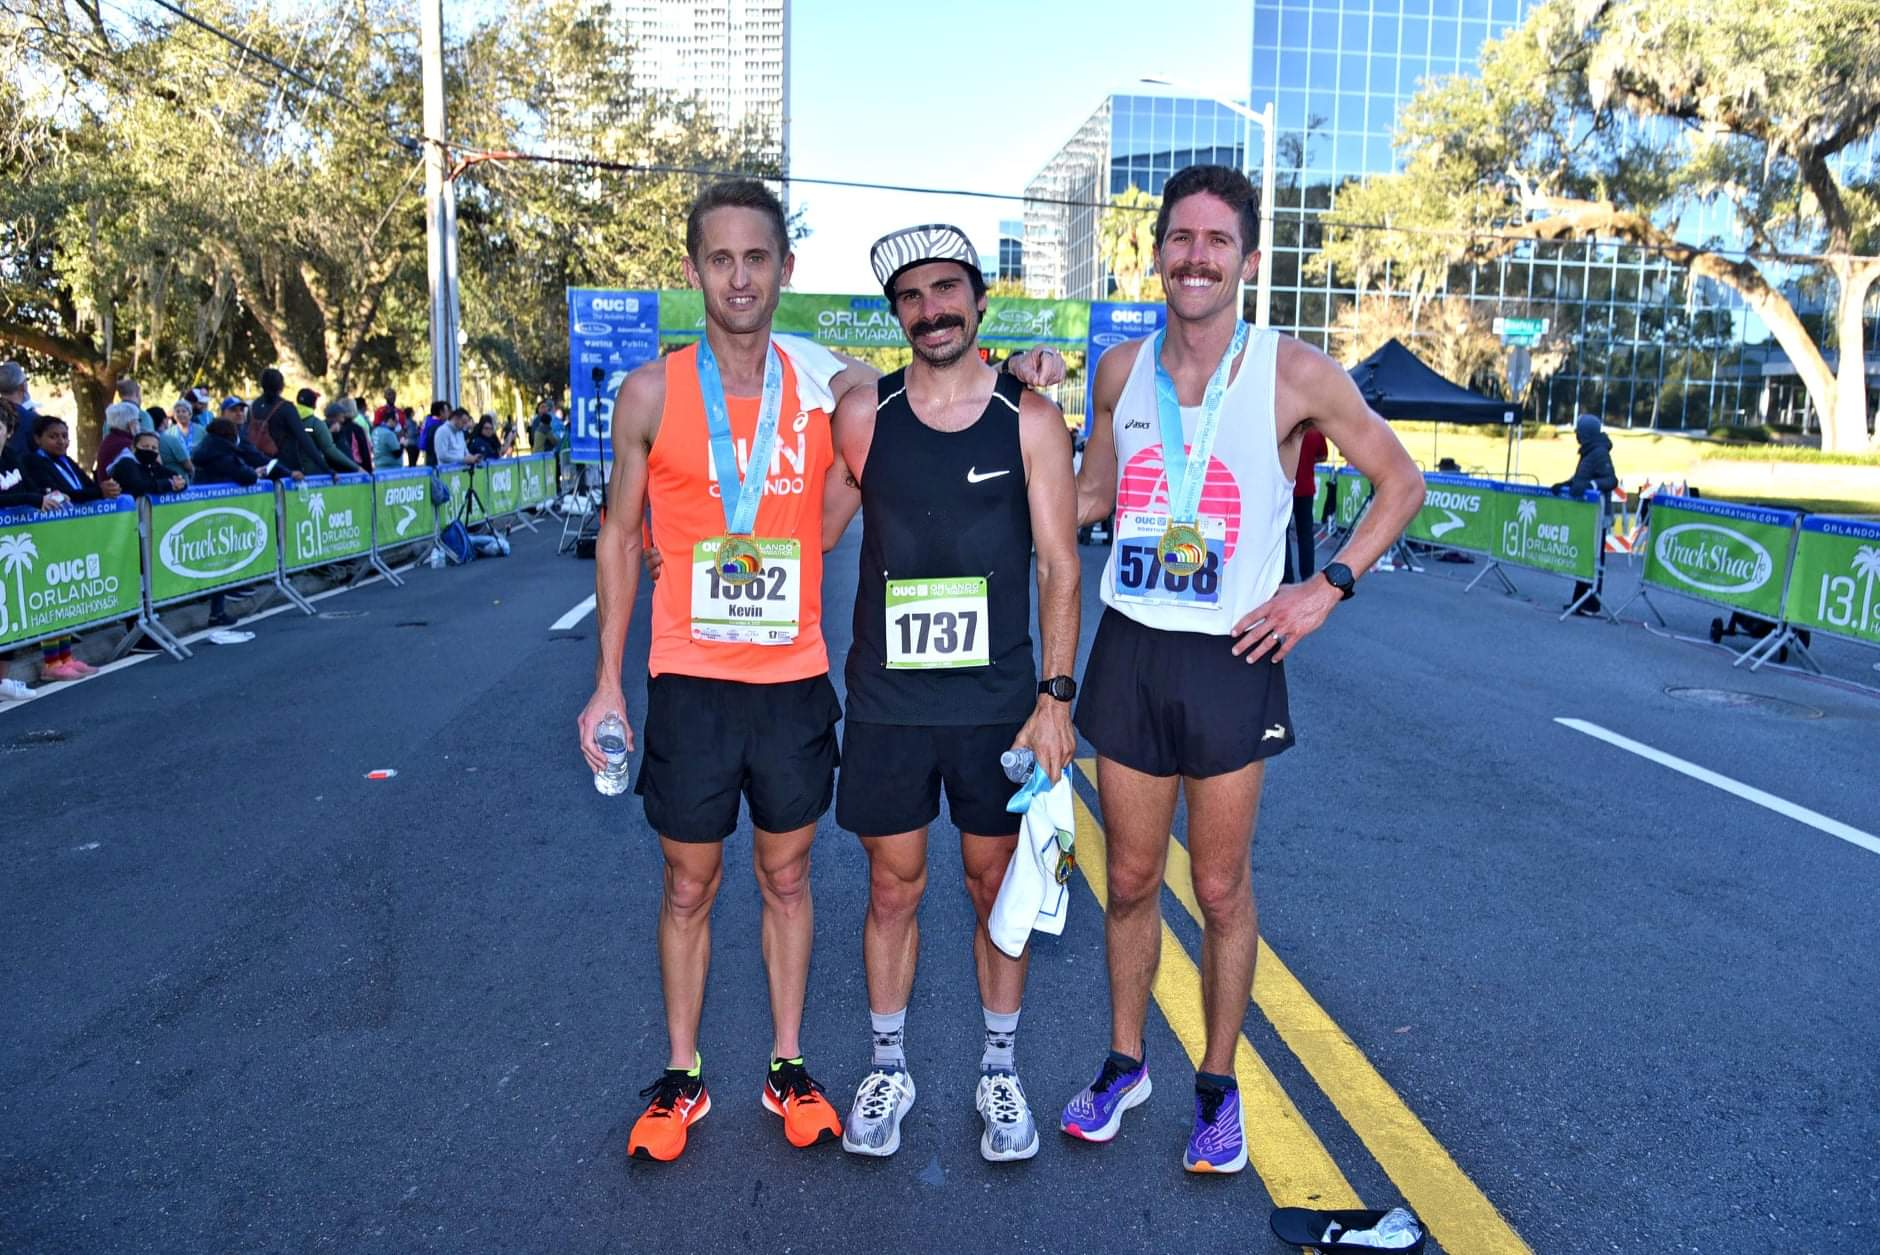 The Top 3 men in the OUC Orlando Half-Marathon were Kevin Collington, left, second place; Jean-Philippe Thibodeau, third; and Joe Farrand, first.